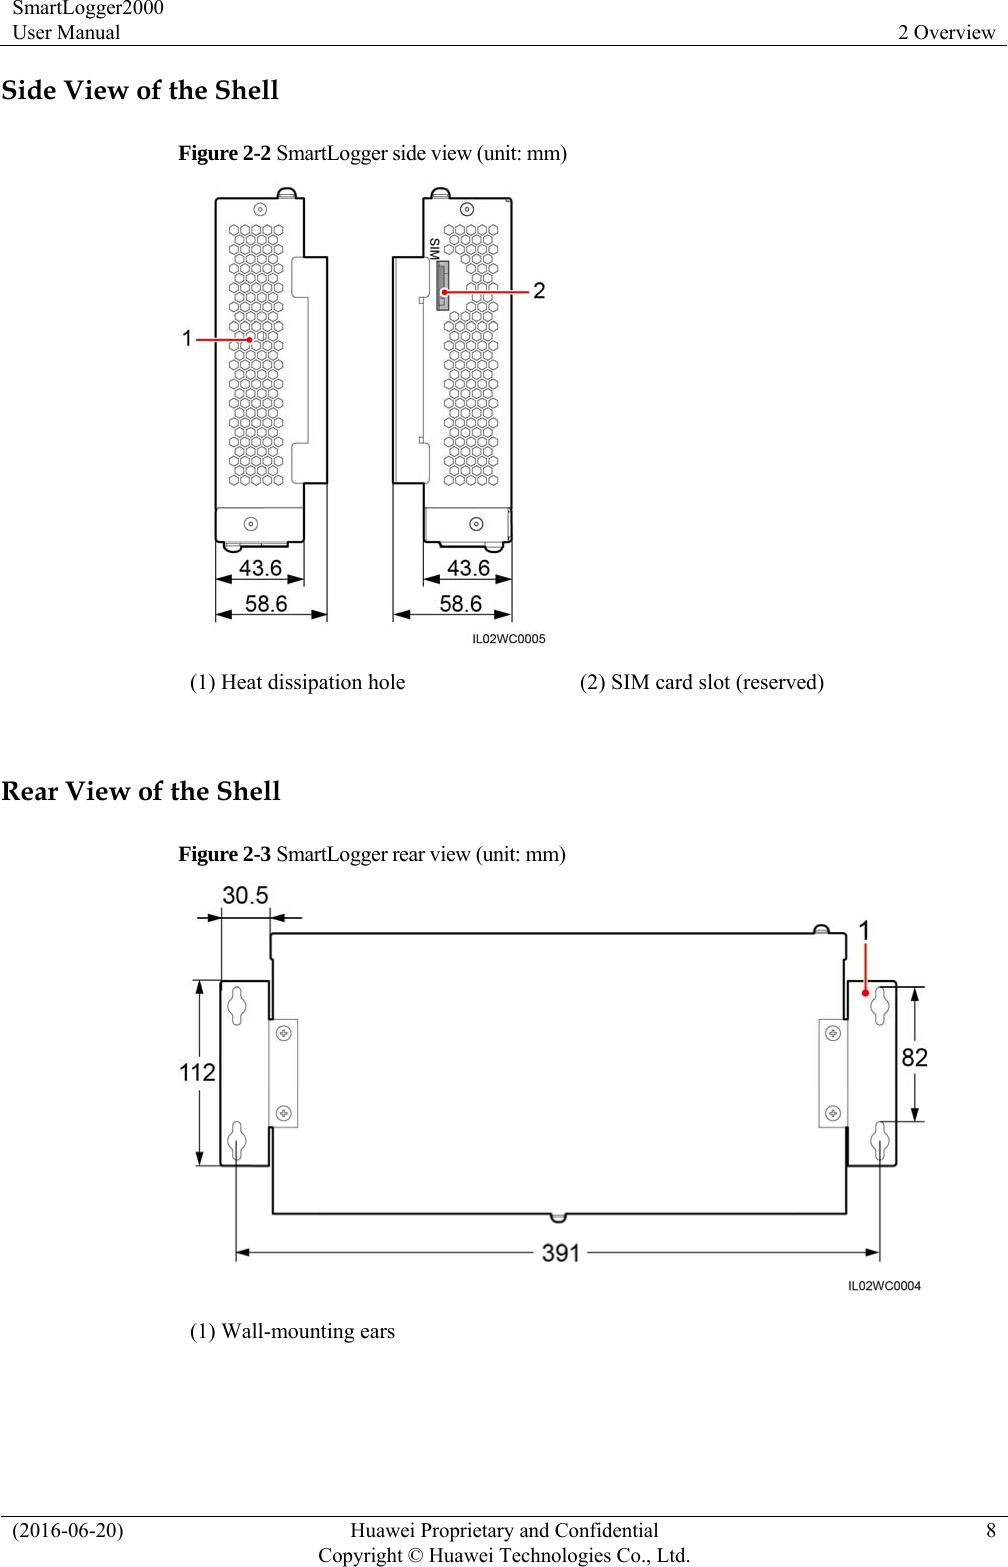 SmartLogger2000 User Manual  2 Overview (2016-06-20)  Huawei Proprietary and Confidential         Copyright © Huawei Technologies Co., Ltd.8 Side View of the Shell Figure 2-2 SmartLogger side view (unit: mm)  (1) Heat dissipation hole  (2) SIM card slot (reserved)  Rear View of the Shell Figure 2-3 SmartLogger rear view (unit: mm)  (1) Wall-mounting ears  